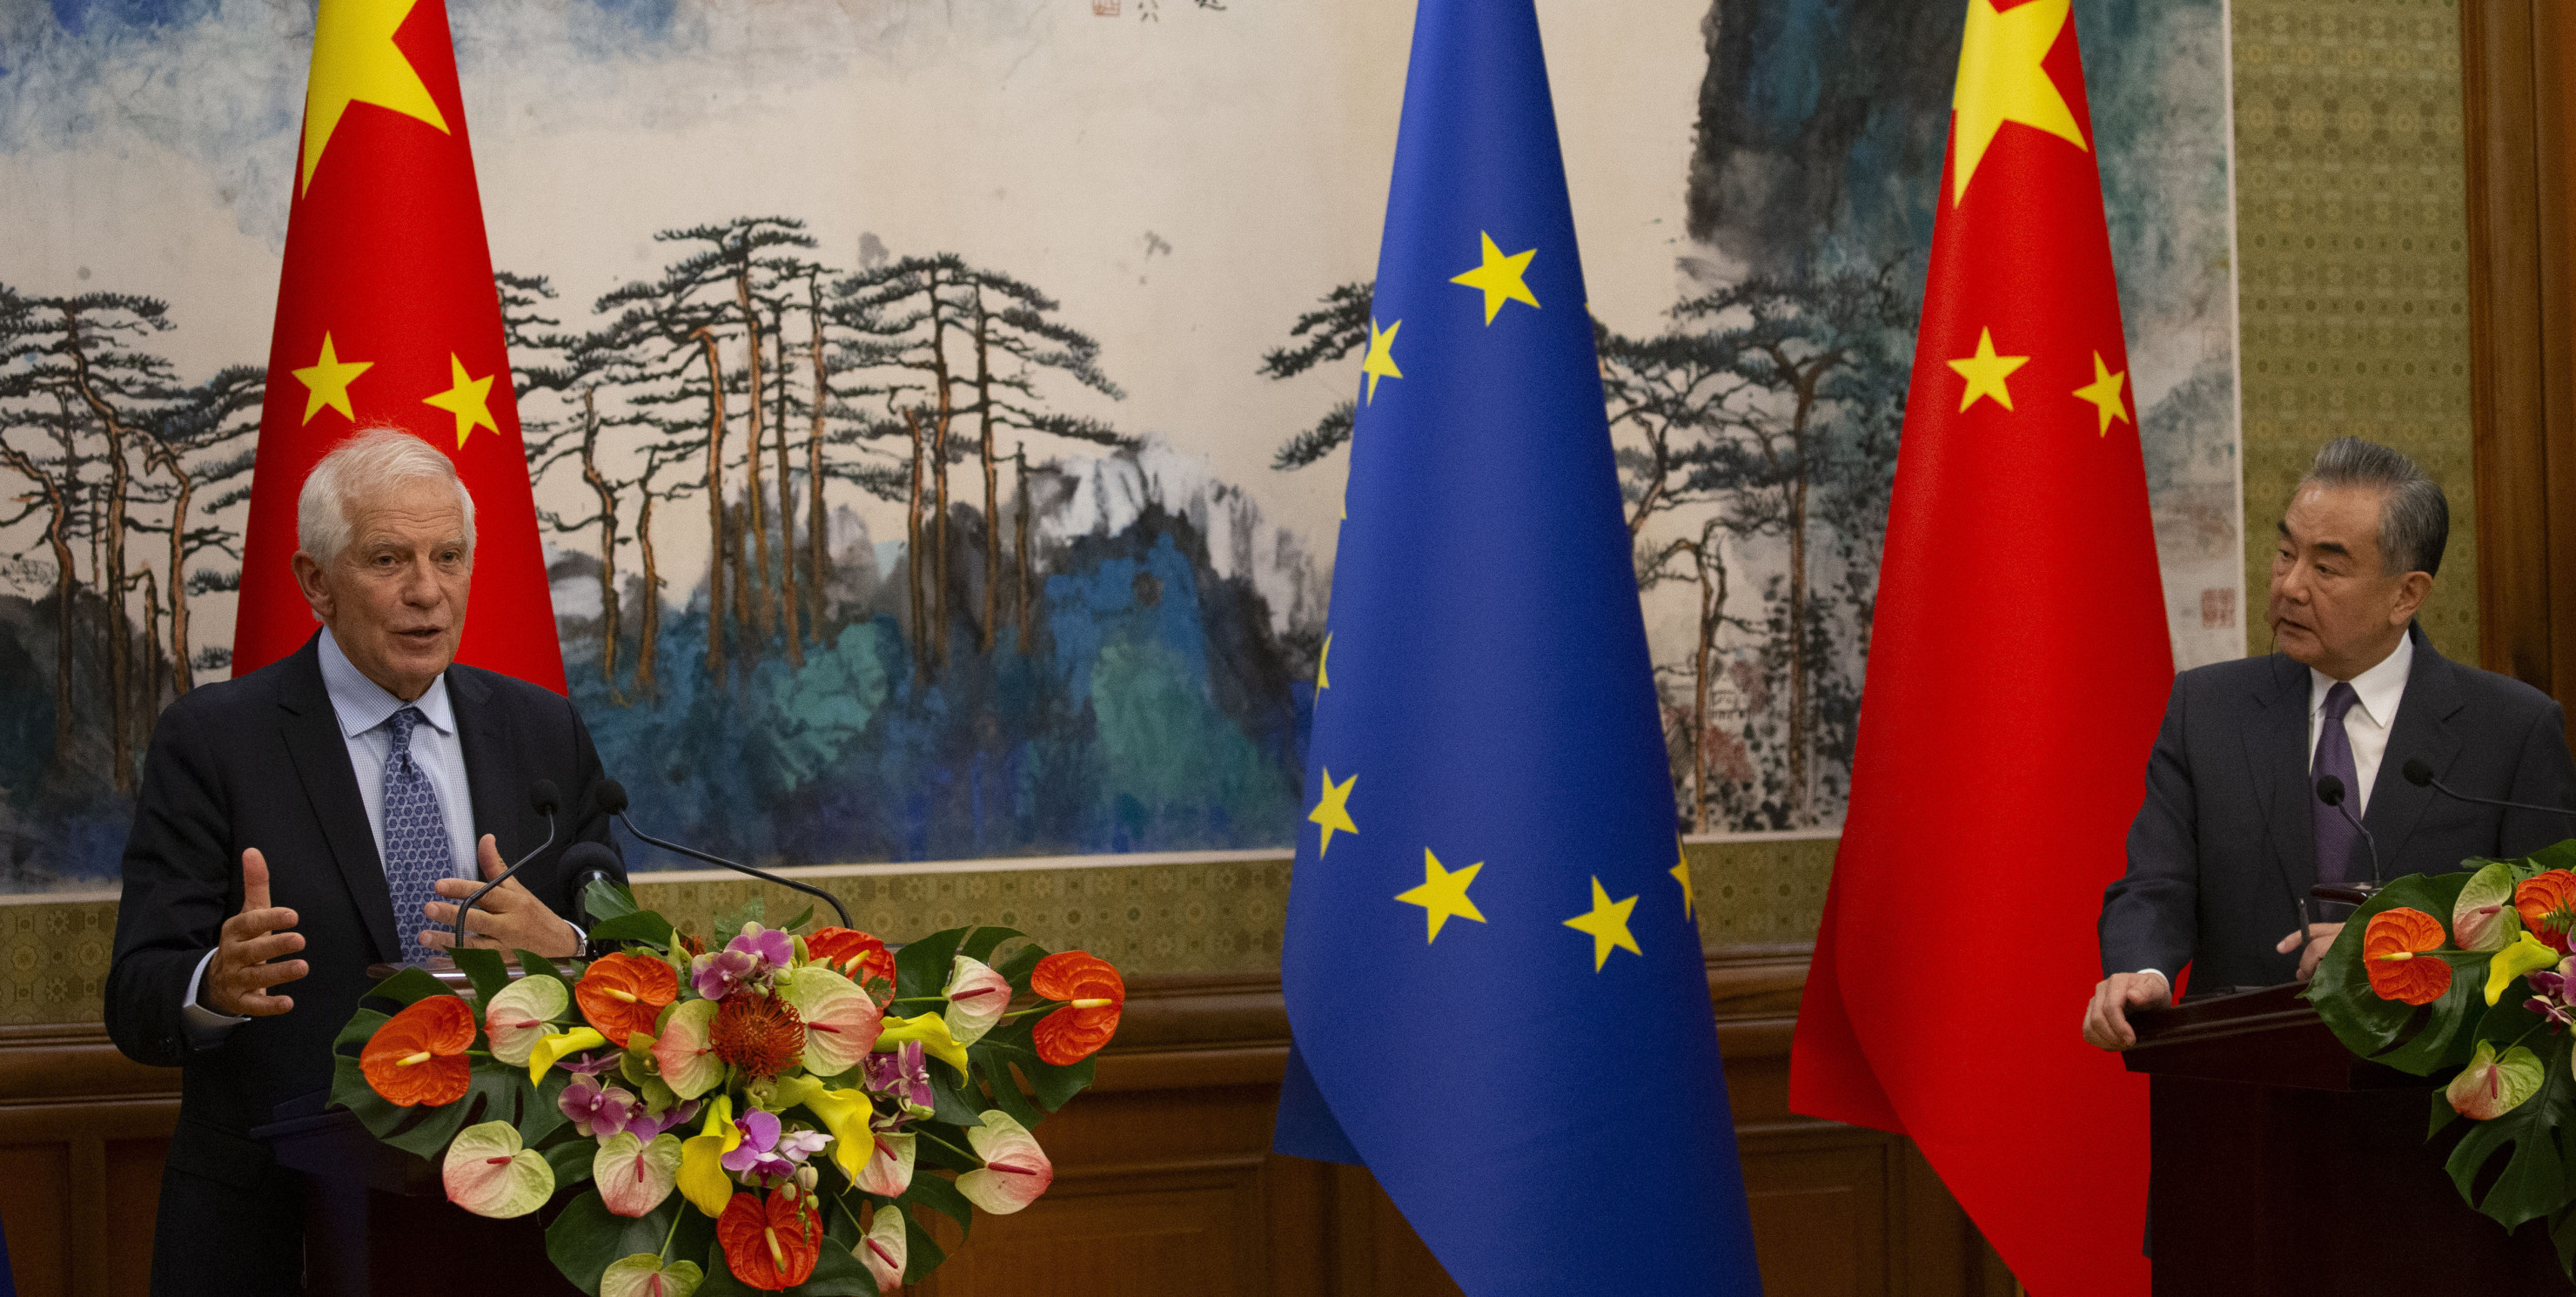 EU foreign policy chief Josep Borrell, left, and Chinese Foreign Minister Wang Yi attend a press conference following the EU-China High-Level Strate